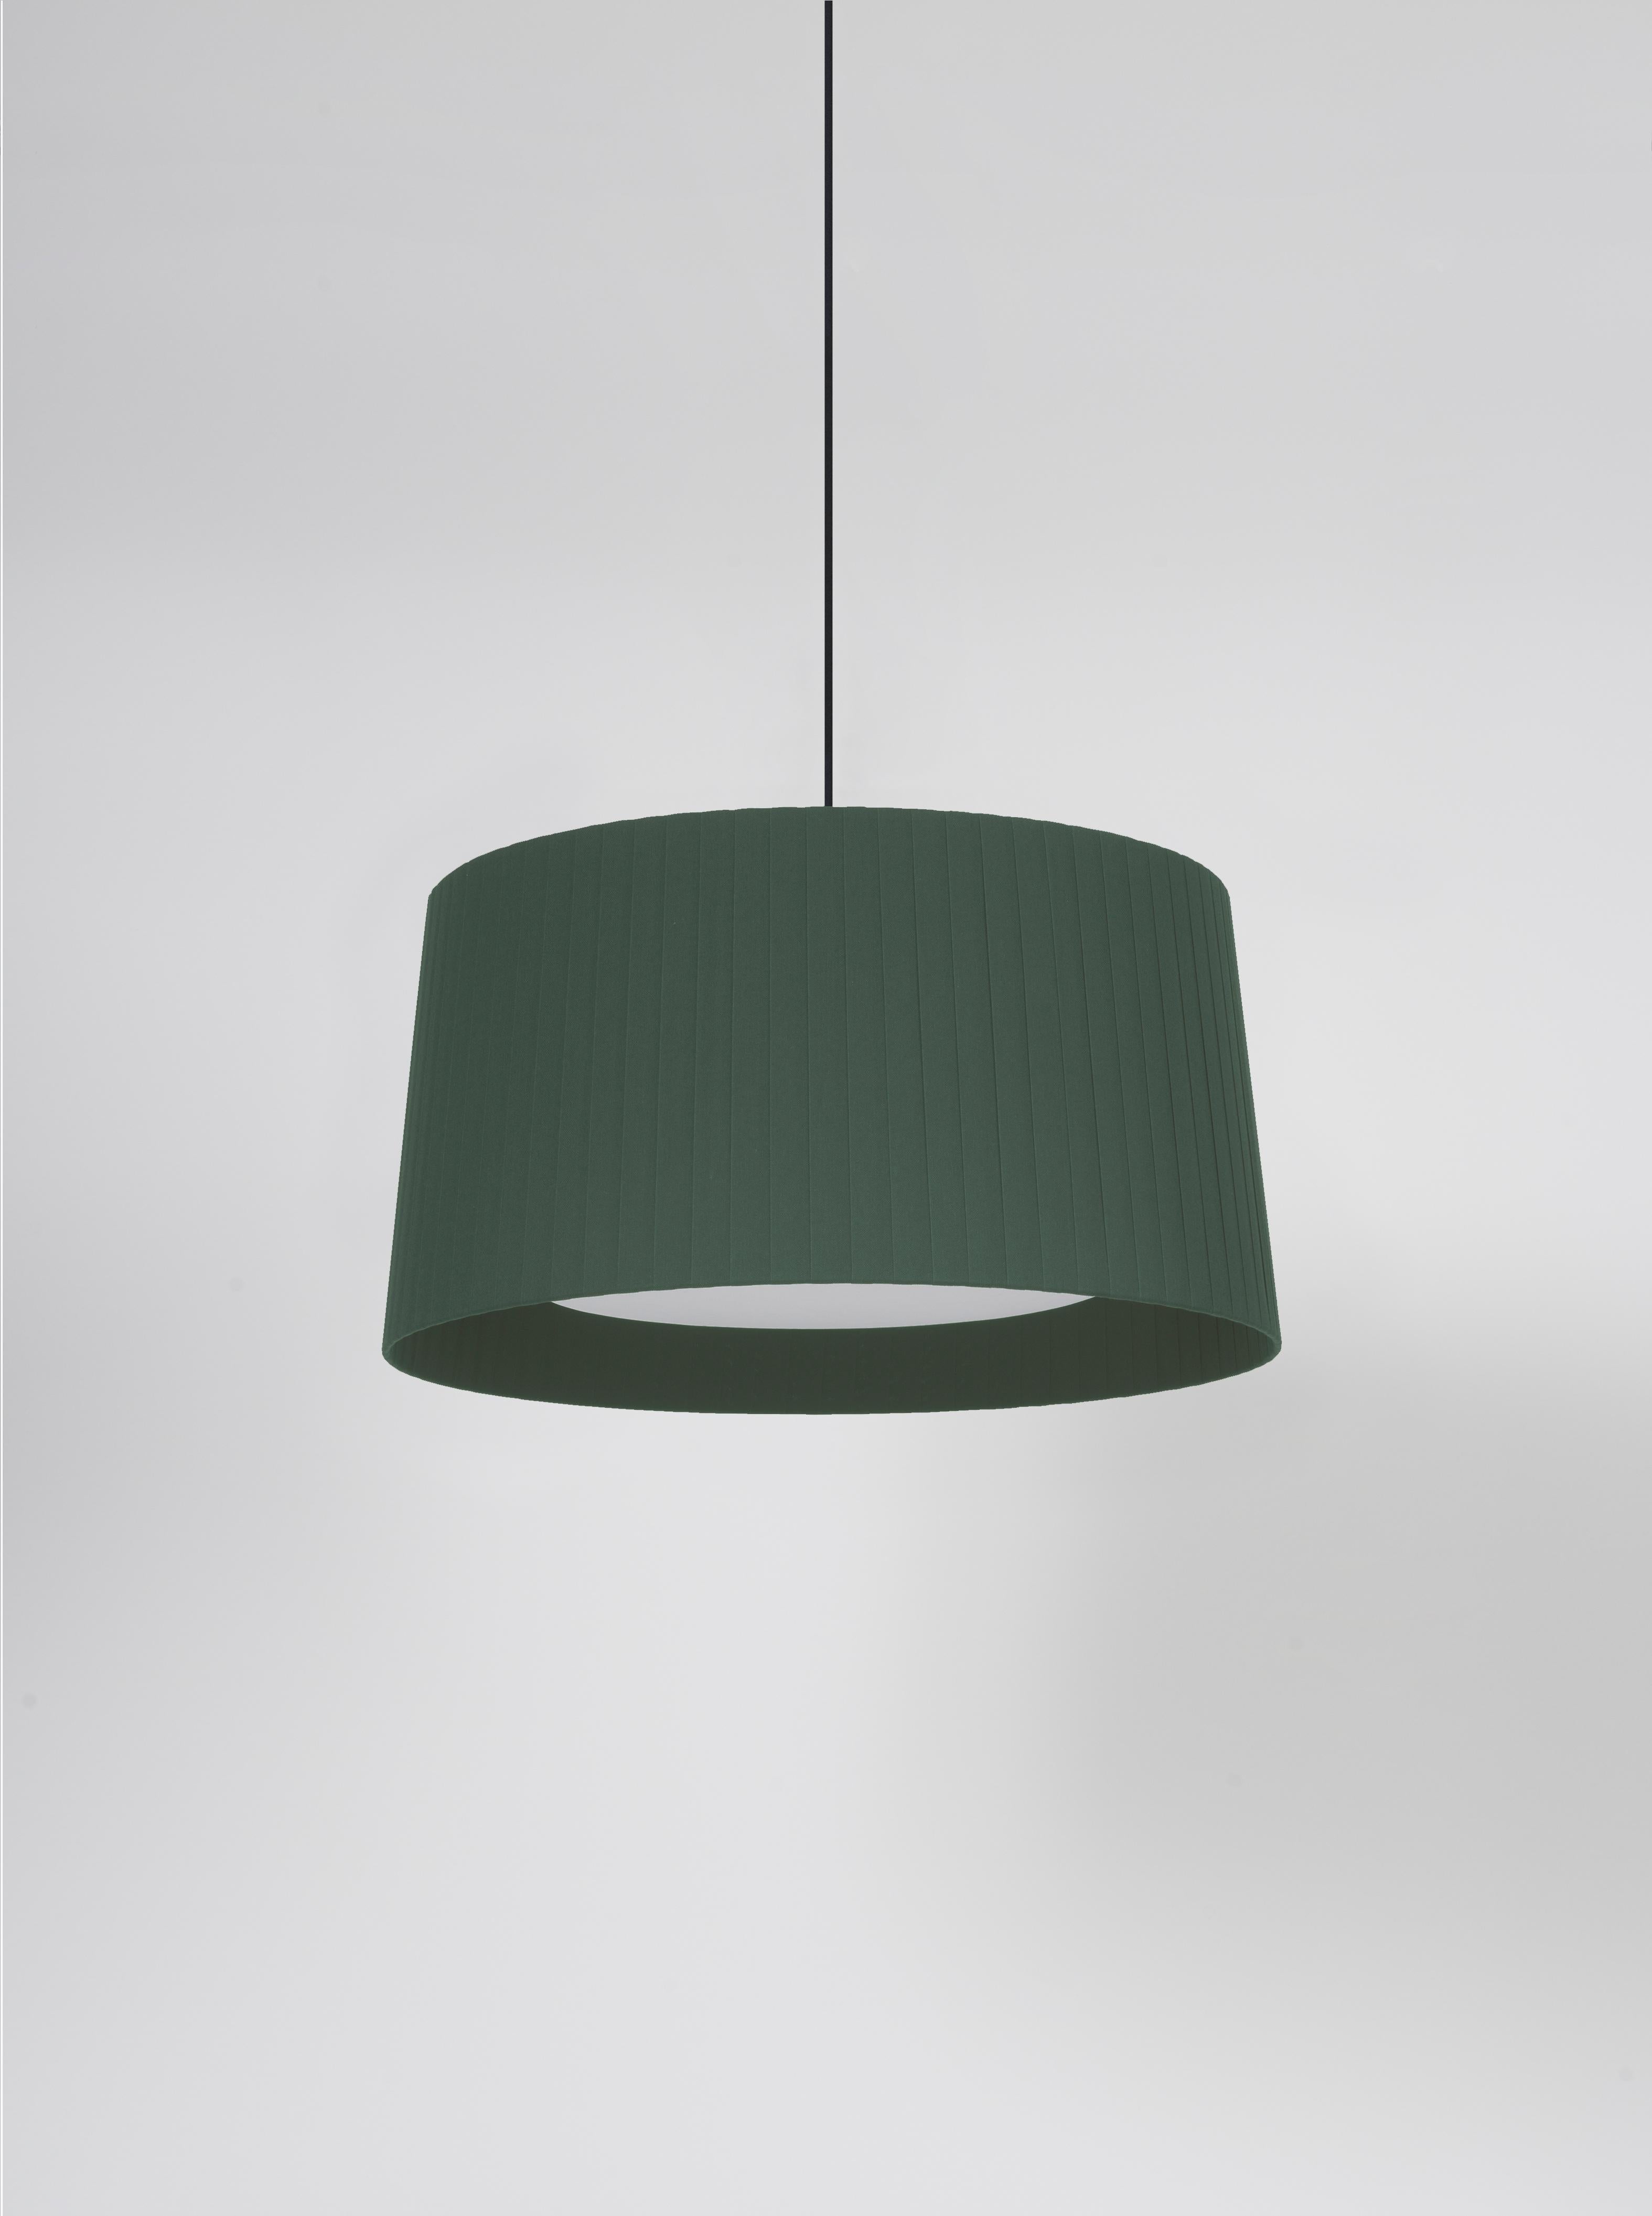 Green GT5 pendant lamp by Santa & Cole
Dimensions: D 62 x H 32 cm
Materials: Metal, ribbon.
Available in other colors. Available in 2 lights version.

Designed for intermediate volumes and household areas, GT5 and GT6 are hanging lamps with